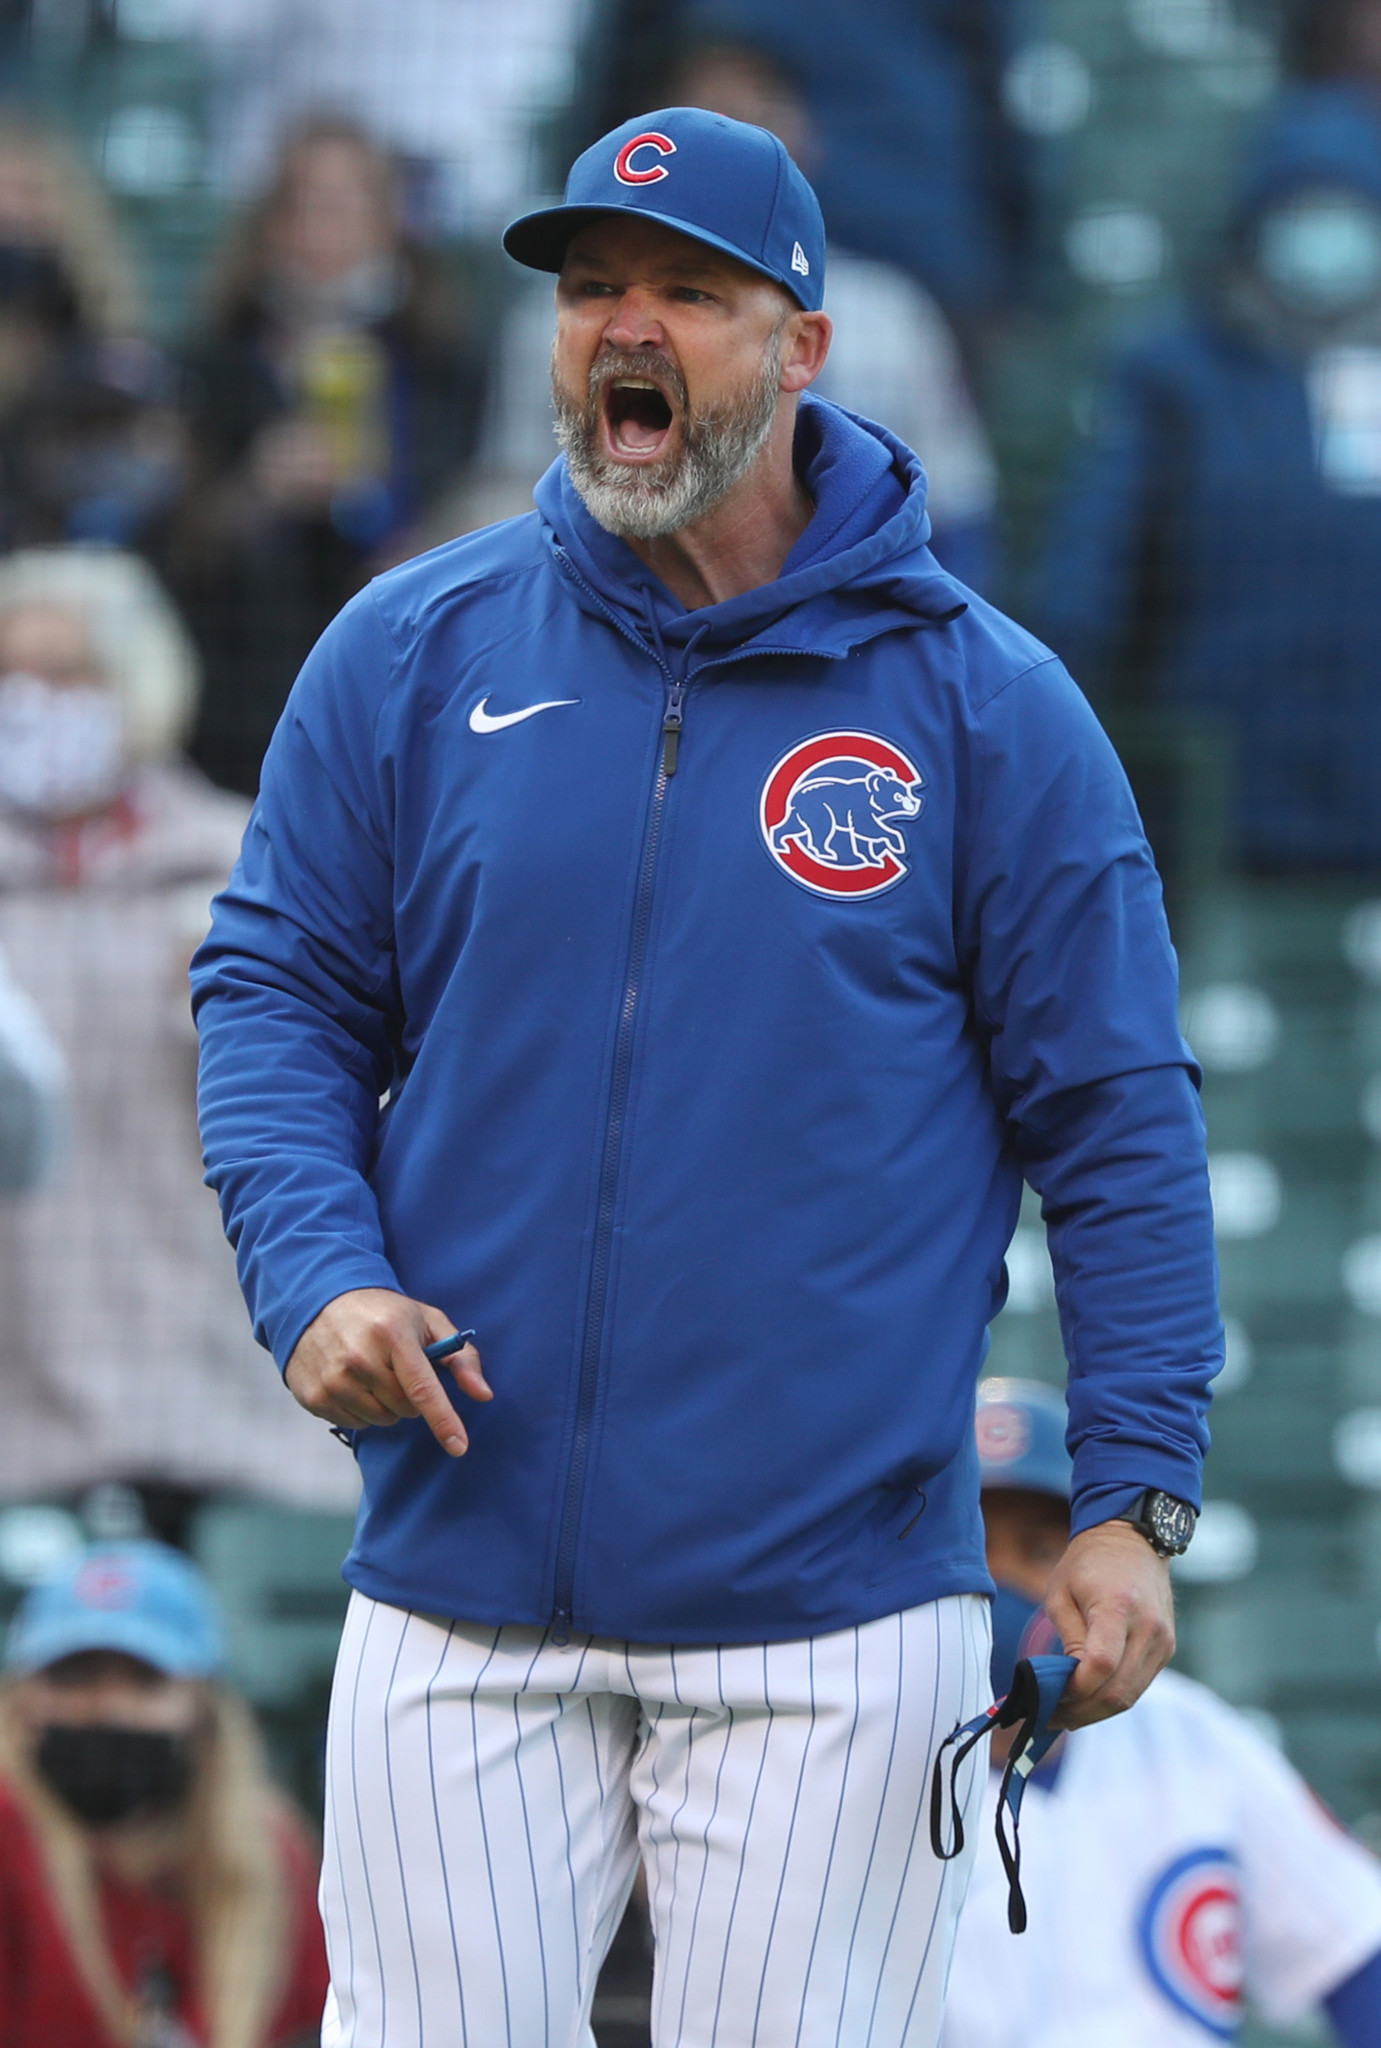 Cubs Hire Former Catcher David Ross As New Manager; Ink 3-Year